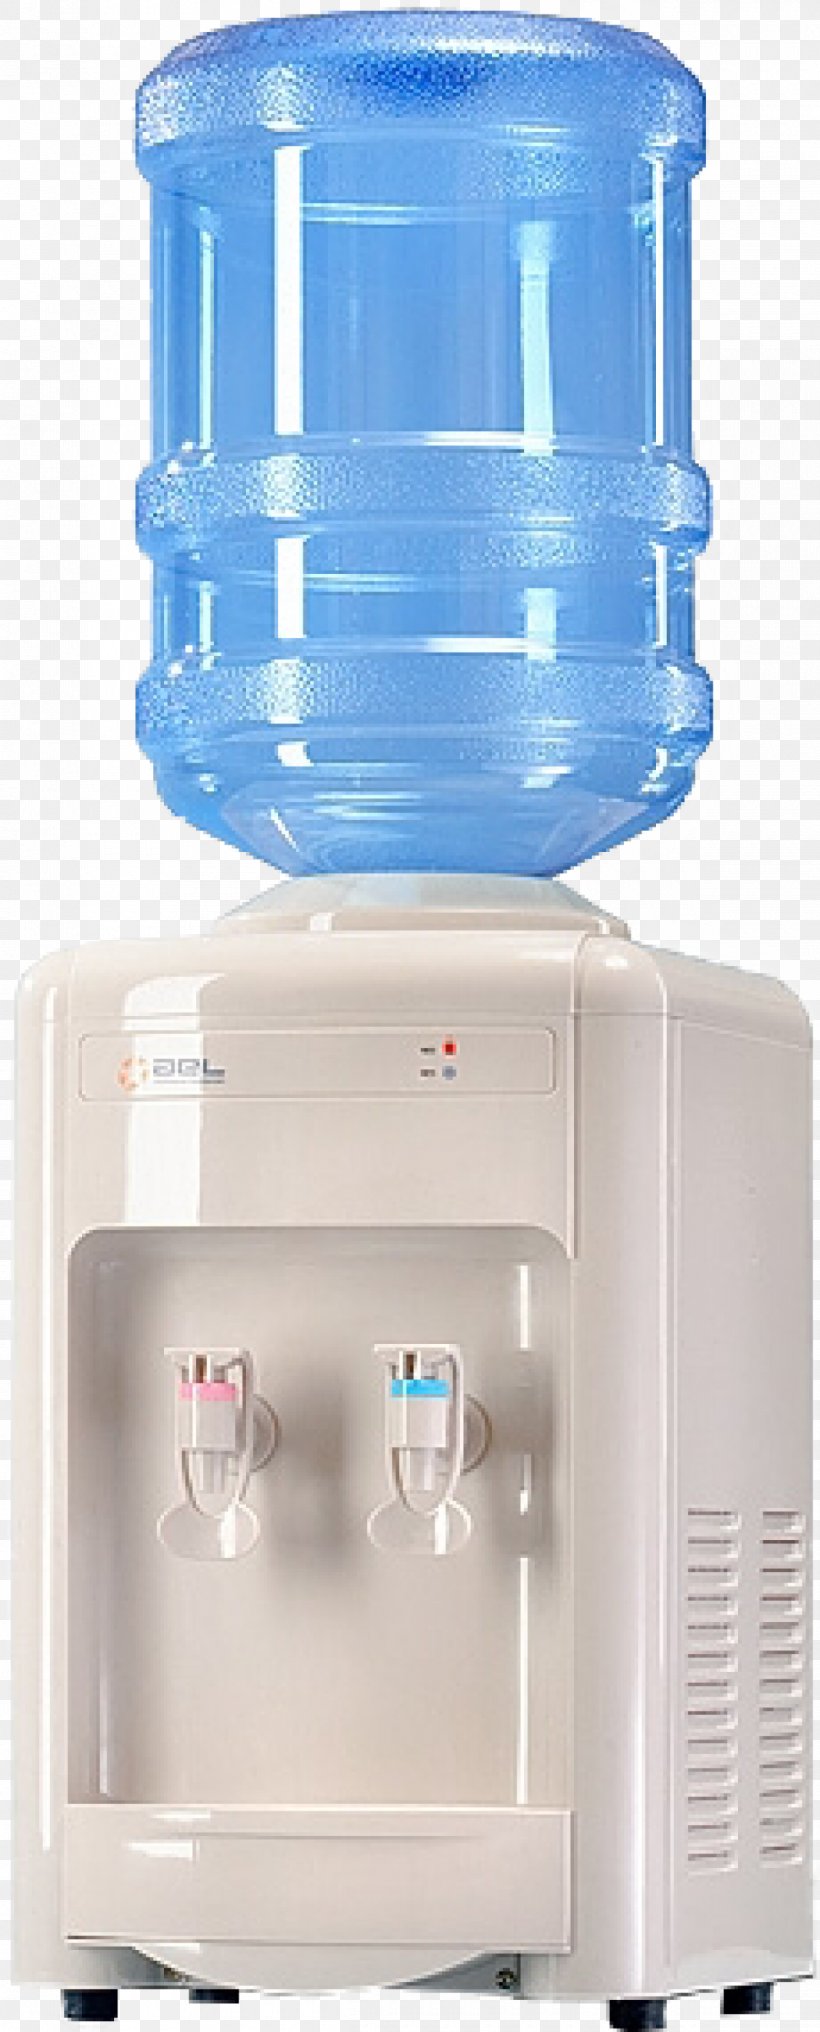 Water Cooler Drinking Water Bottled Water Carboy, PNG, 1200x2974px, Water Cooler, Ael, Bottled Water, Carboy, Cooler Download Free